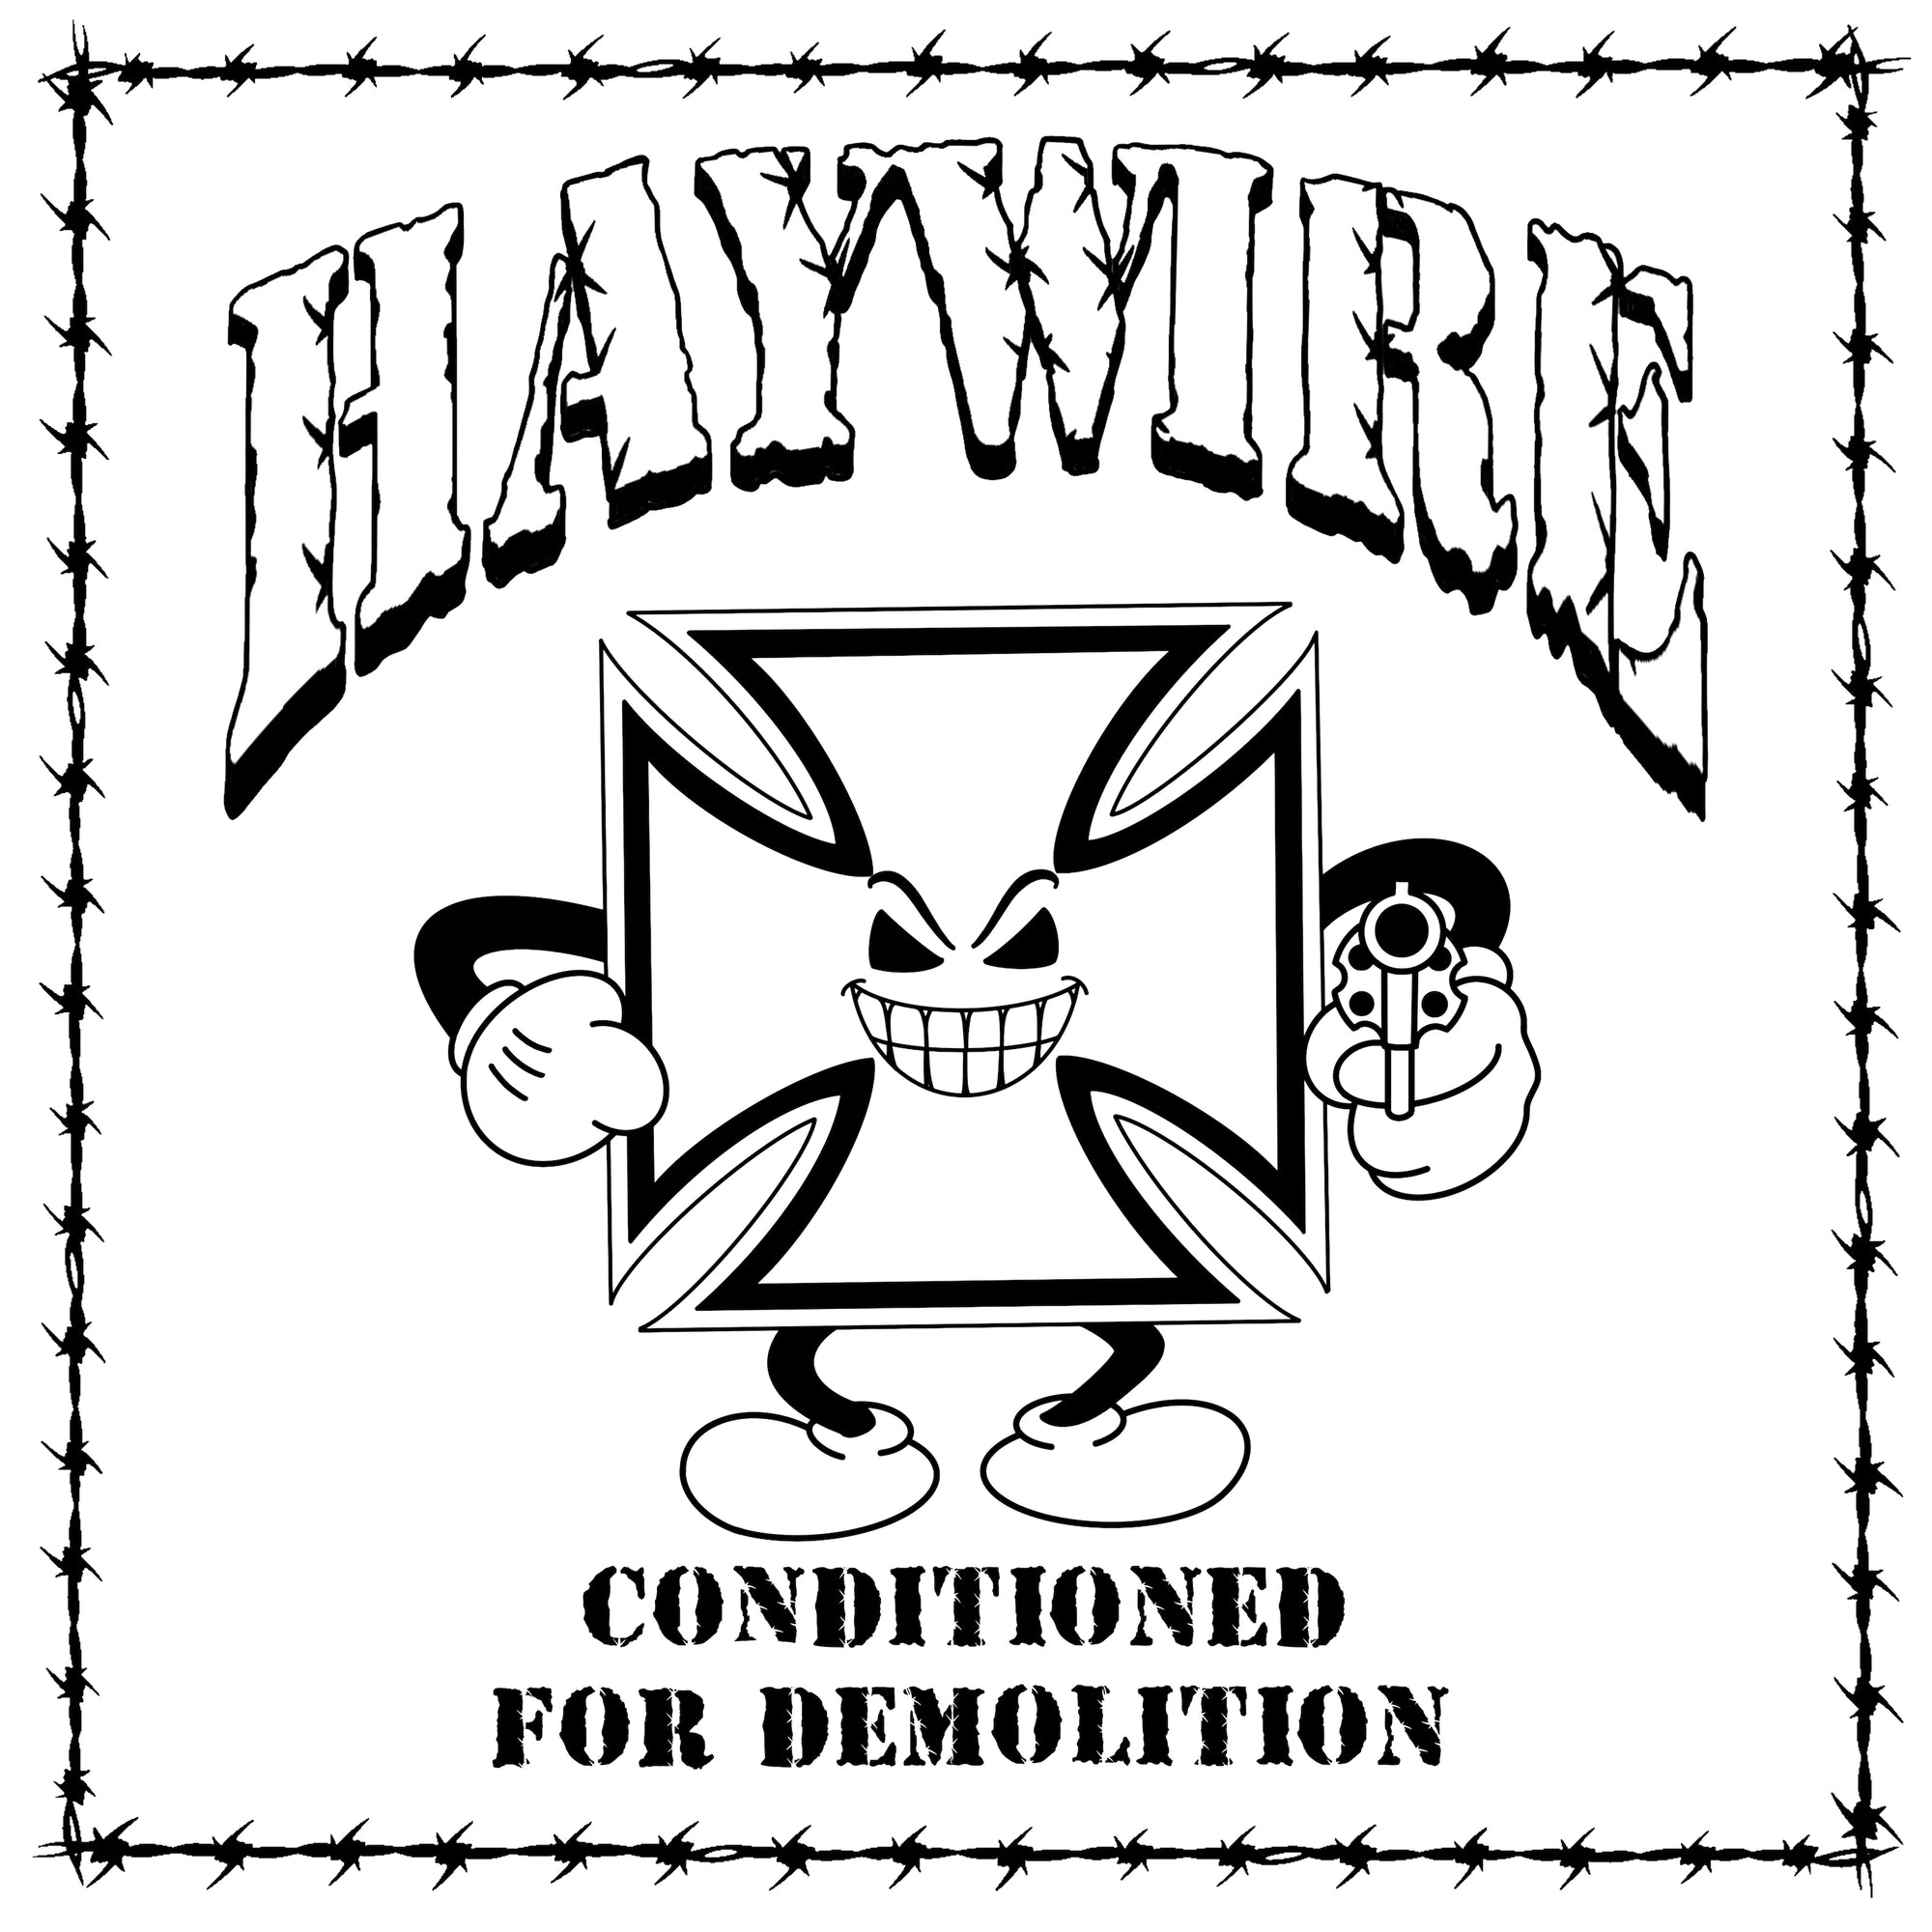 HAYWIRE "Conditioned For Demolition" LP